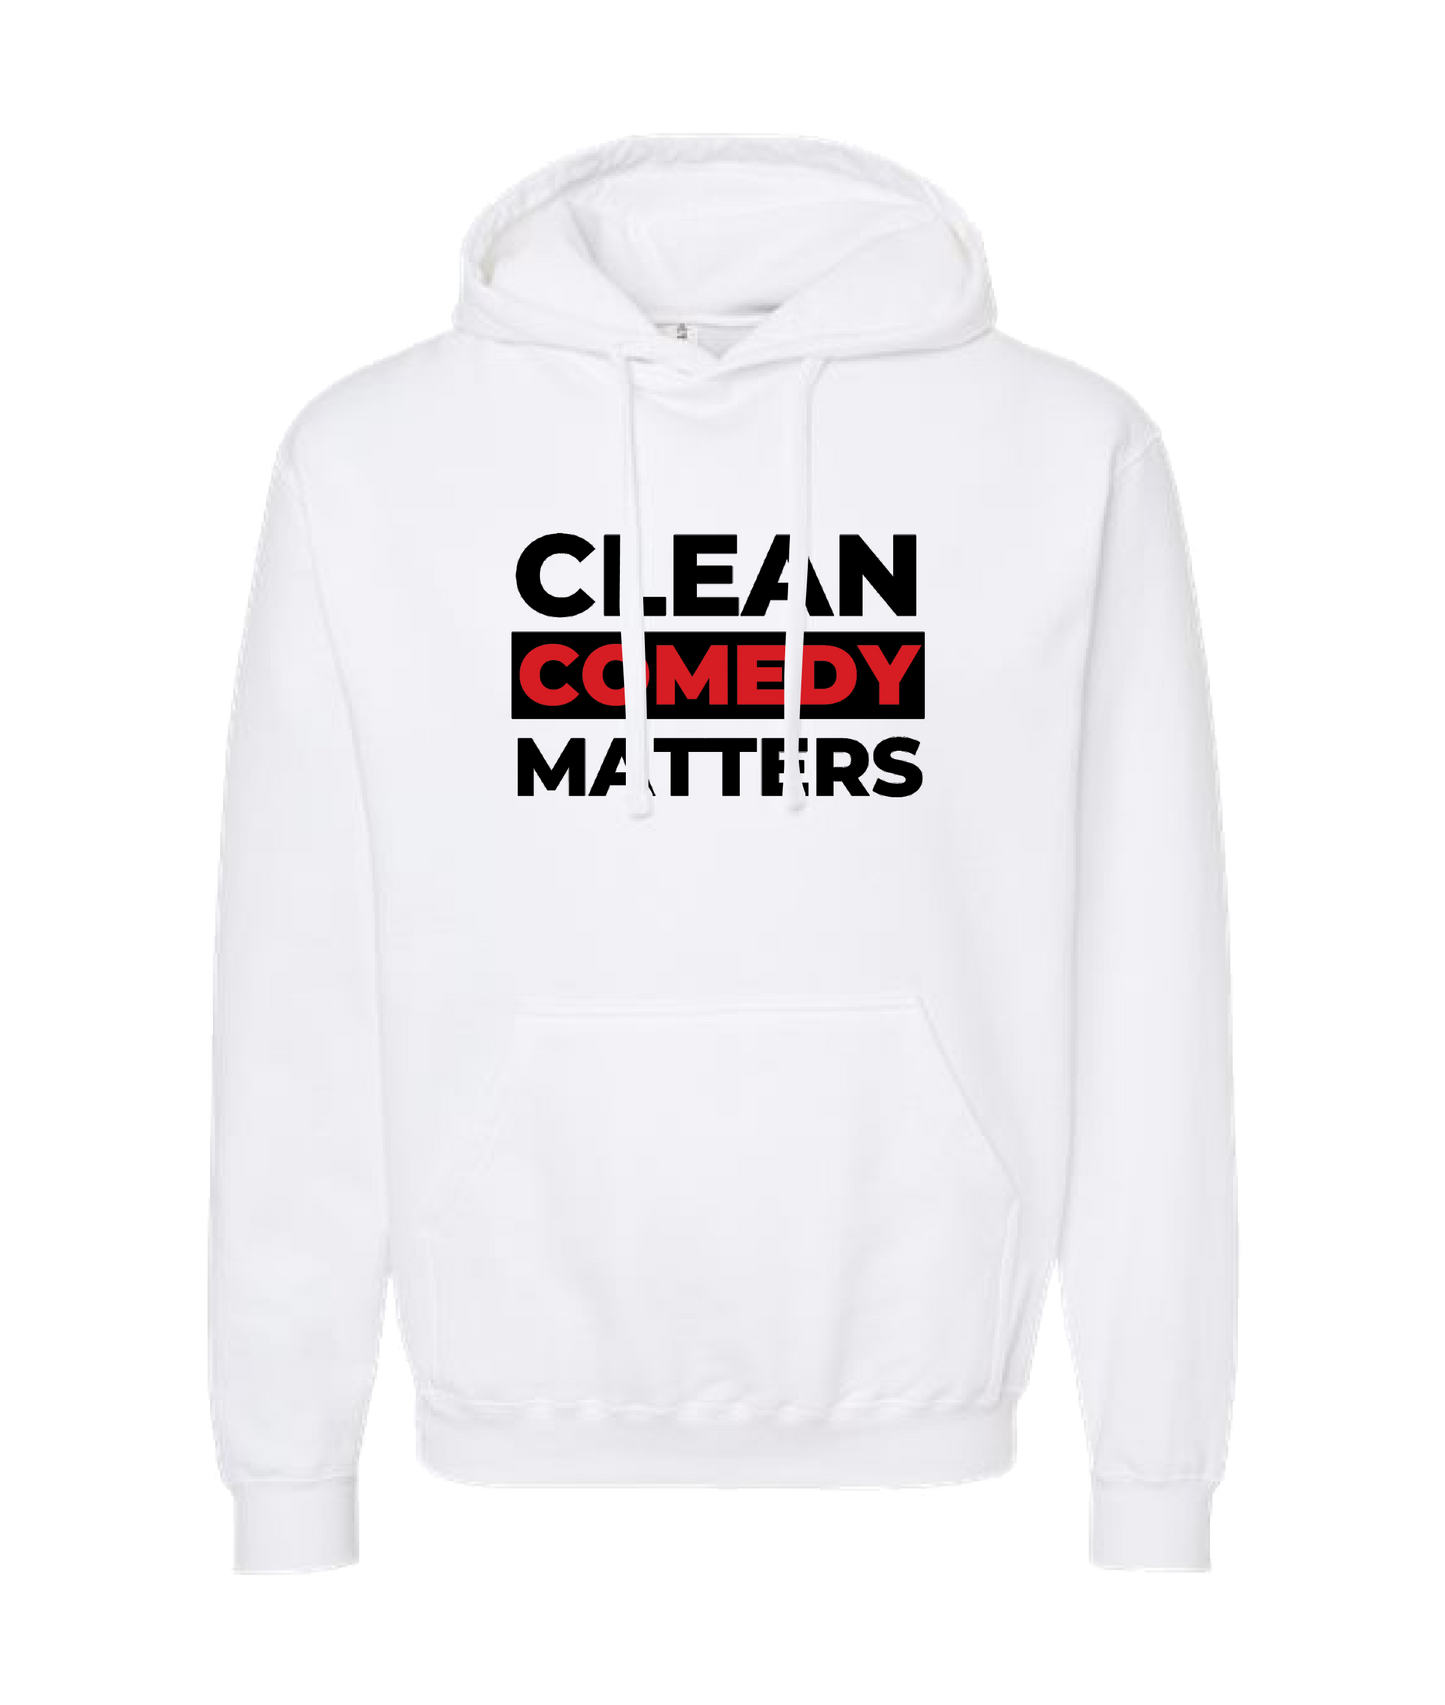 PT Bratton - Clean Comedy Matters - White Hoodie